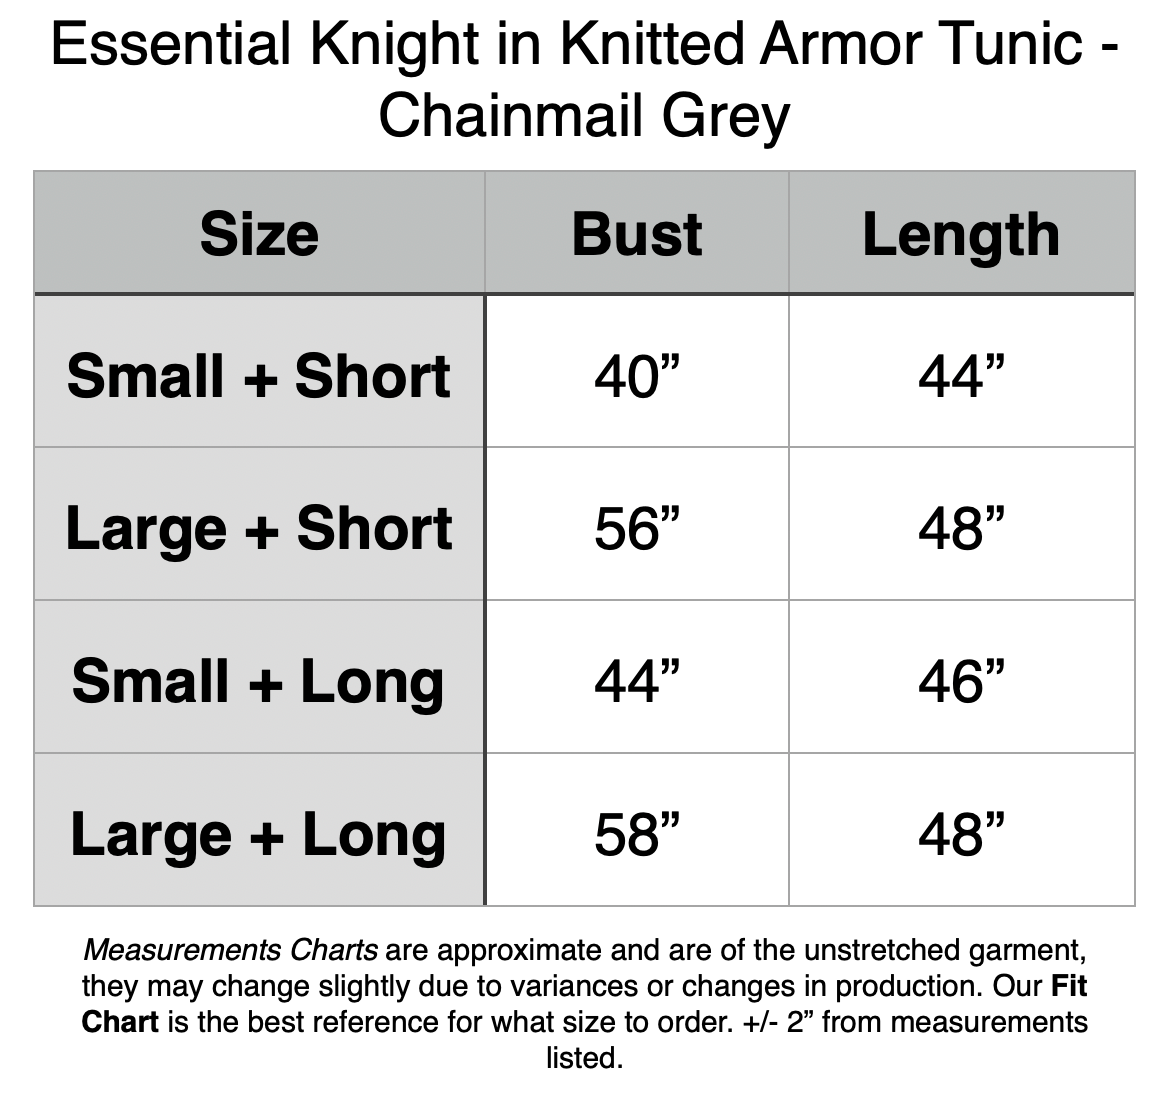 Essential Knight in Knitted Armor Tunic - Chainmail Grey. Small + Short: 40” Bust, 44” Length. Large + Short: 56” Bust, 48” Length. Small + Long: 44” Bust, 46” Length. Large + Long: 58” Bust, 48” Length.